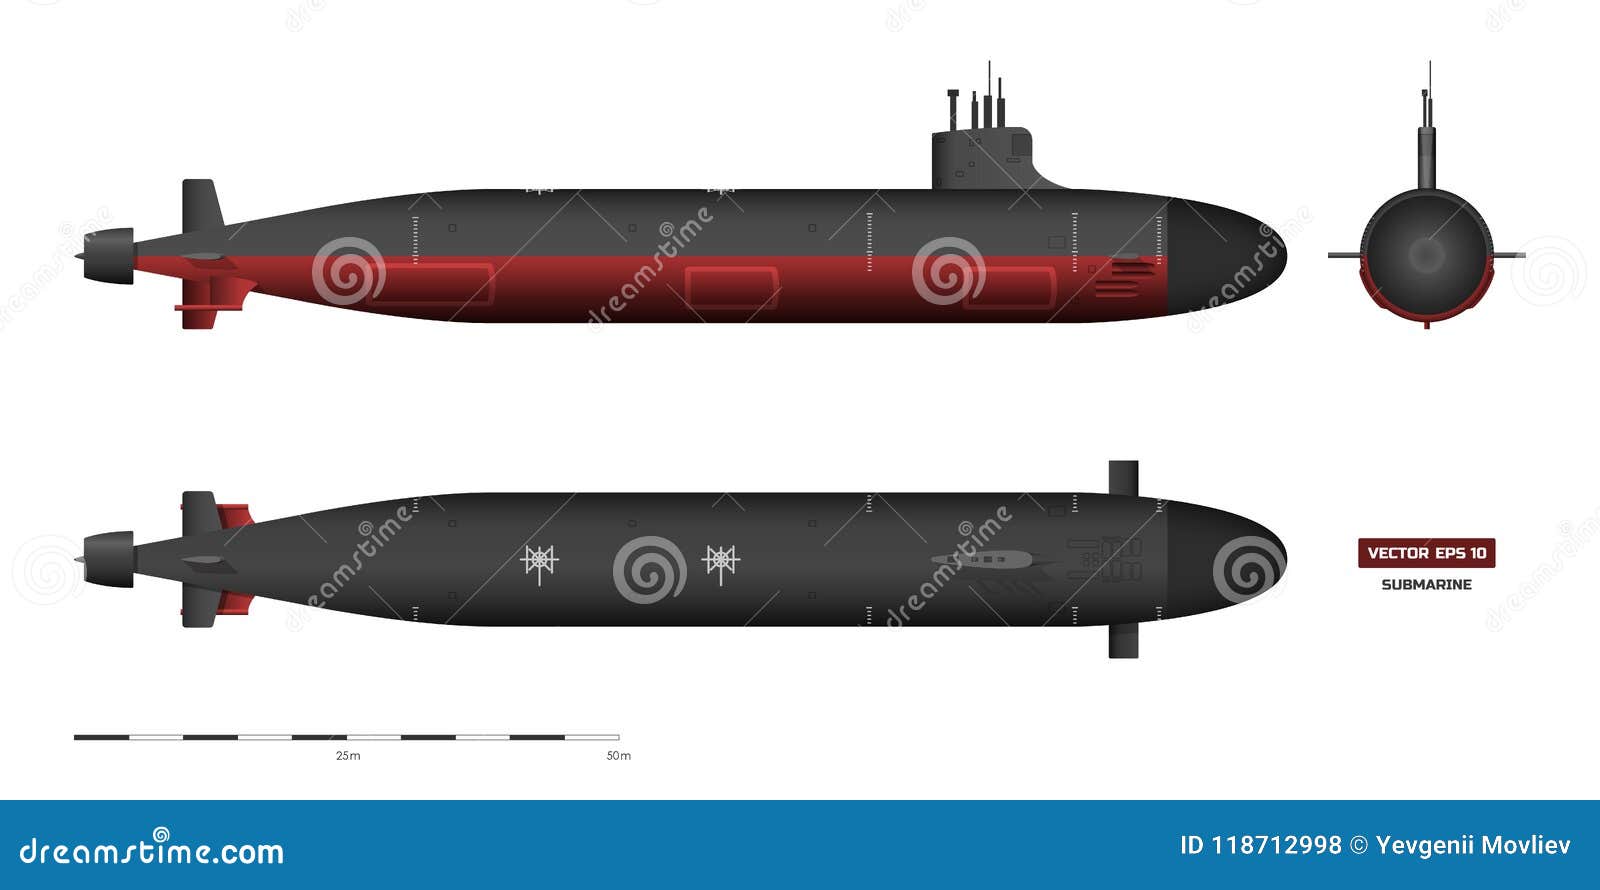 detailed image of submarine. military ship. top, front and side view. battleship model. industrial drawing. warship